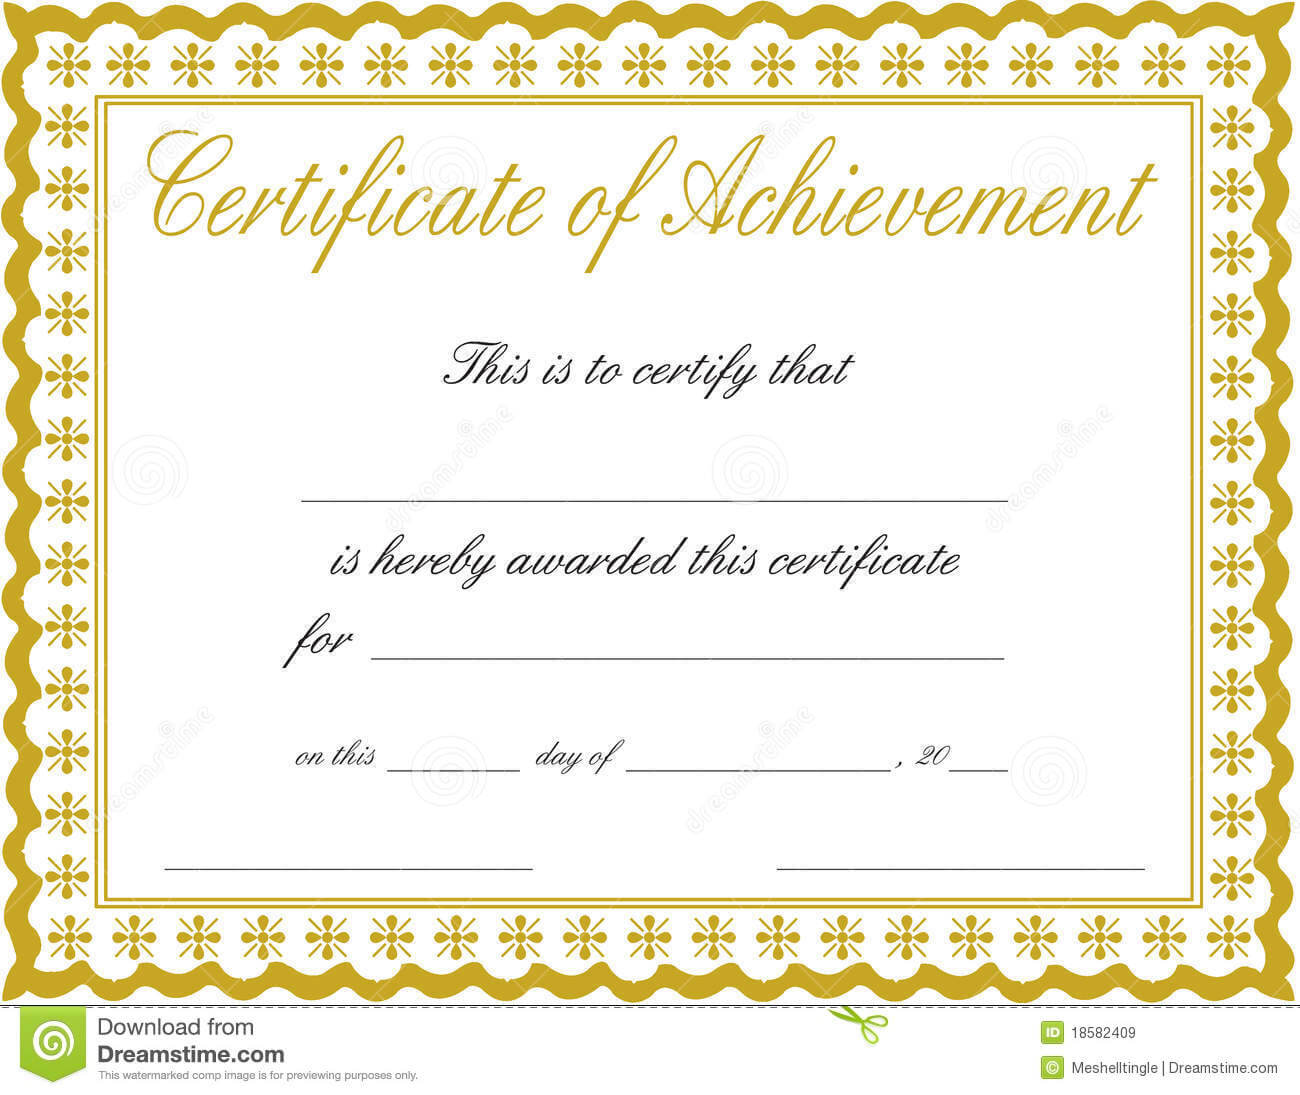 008 Certificate Of Achievement Template Free Download Word Pertaining To Blank Certificate Templates Free Download